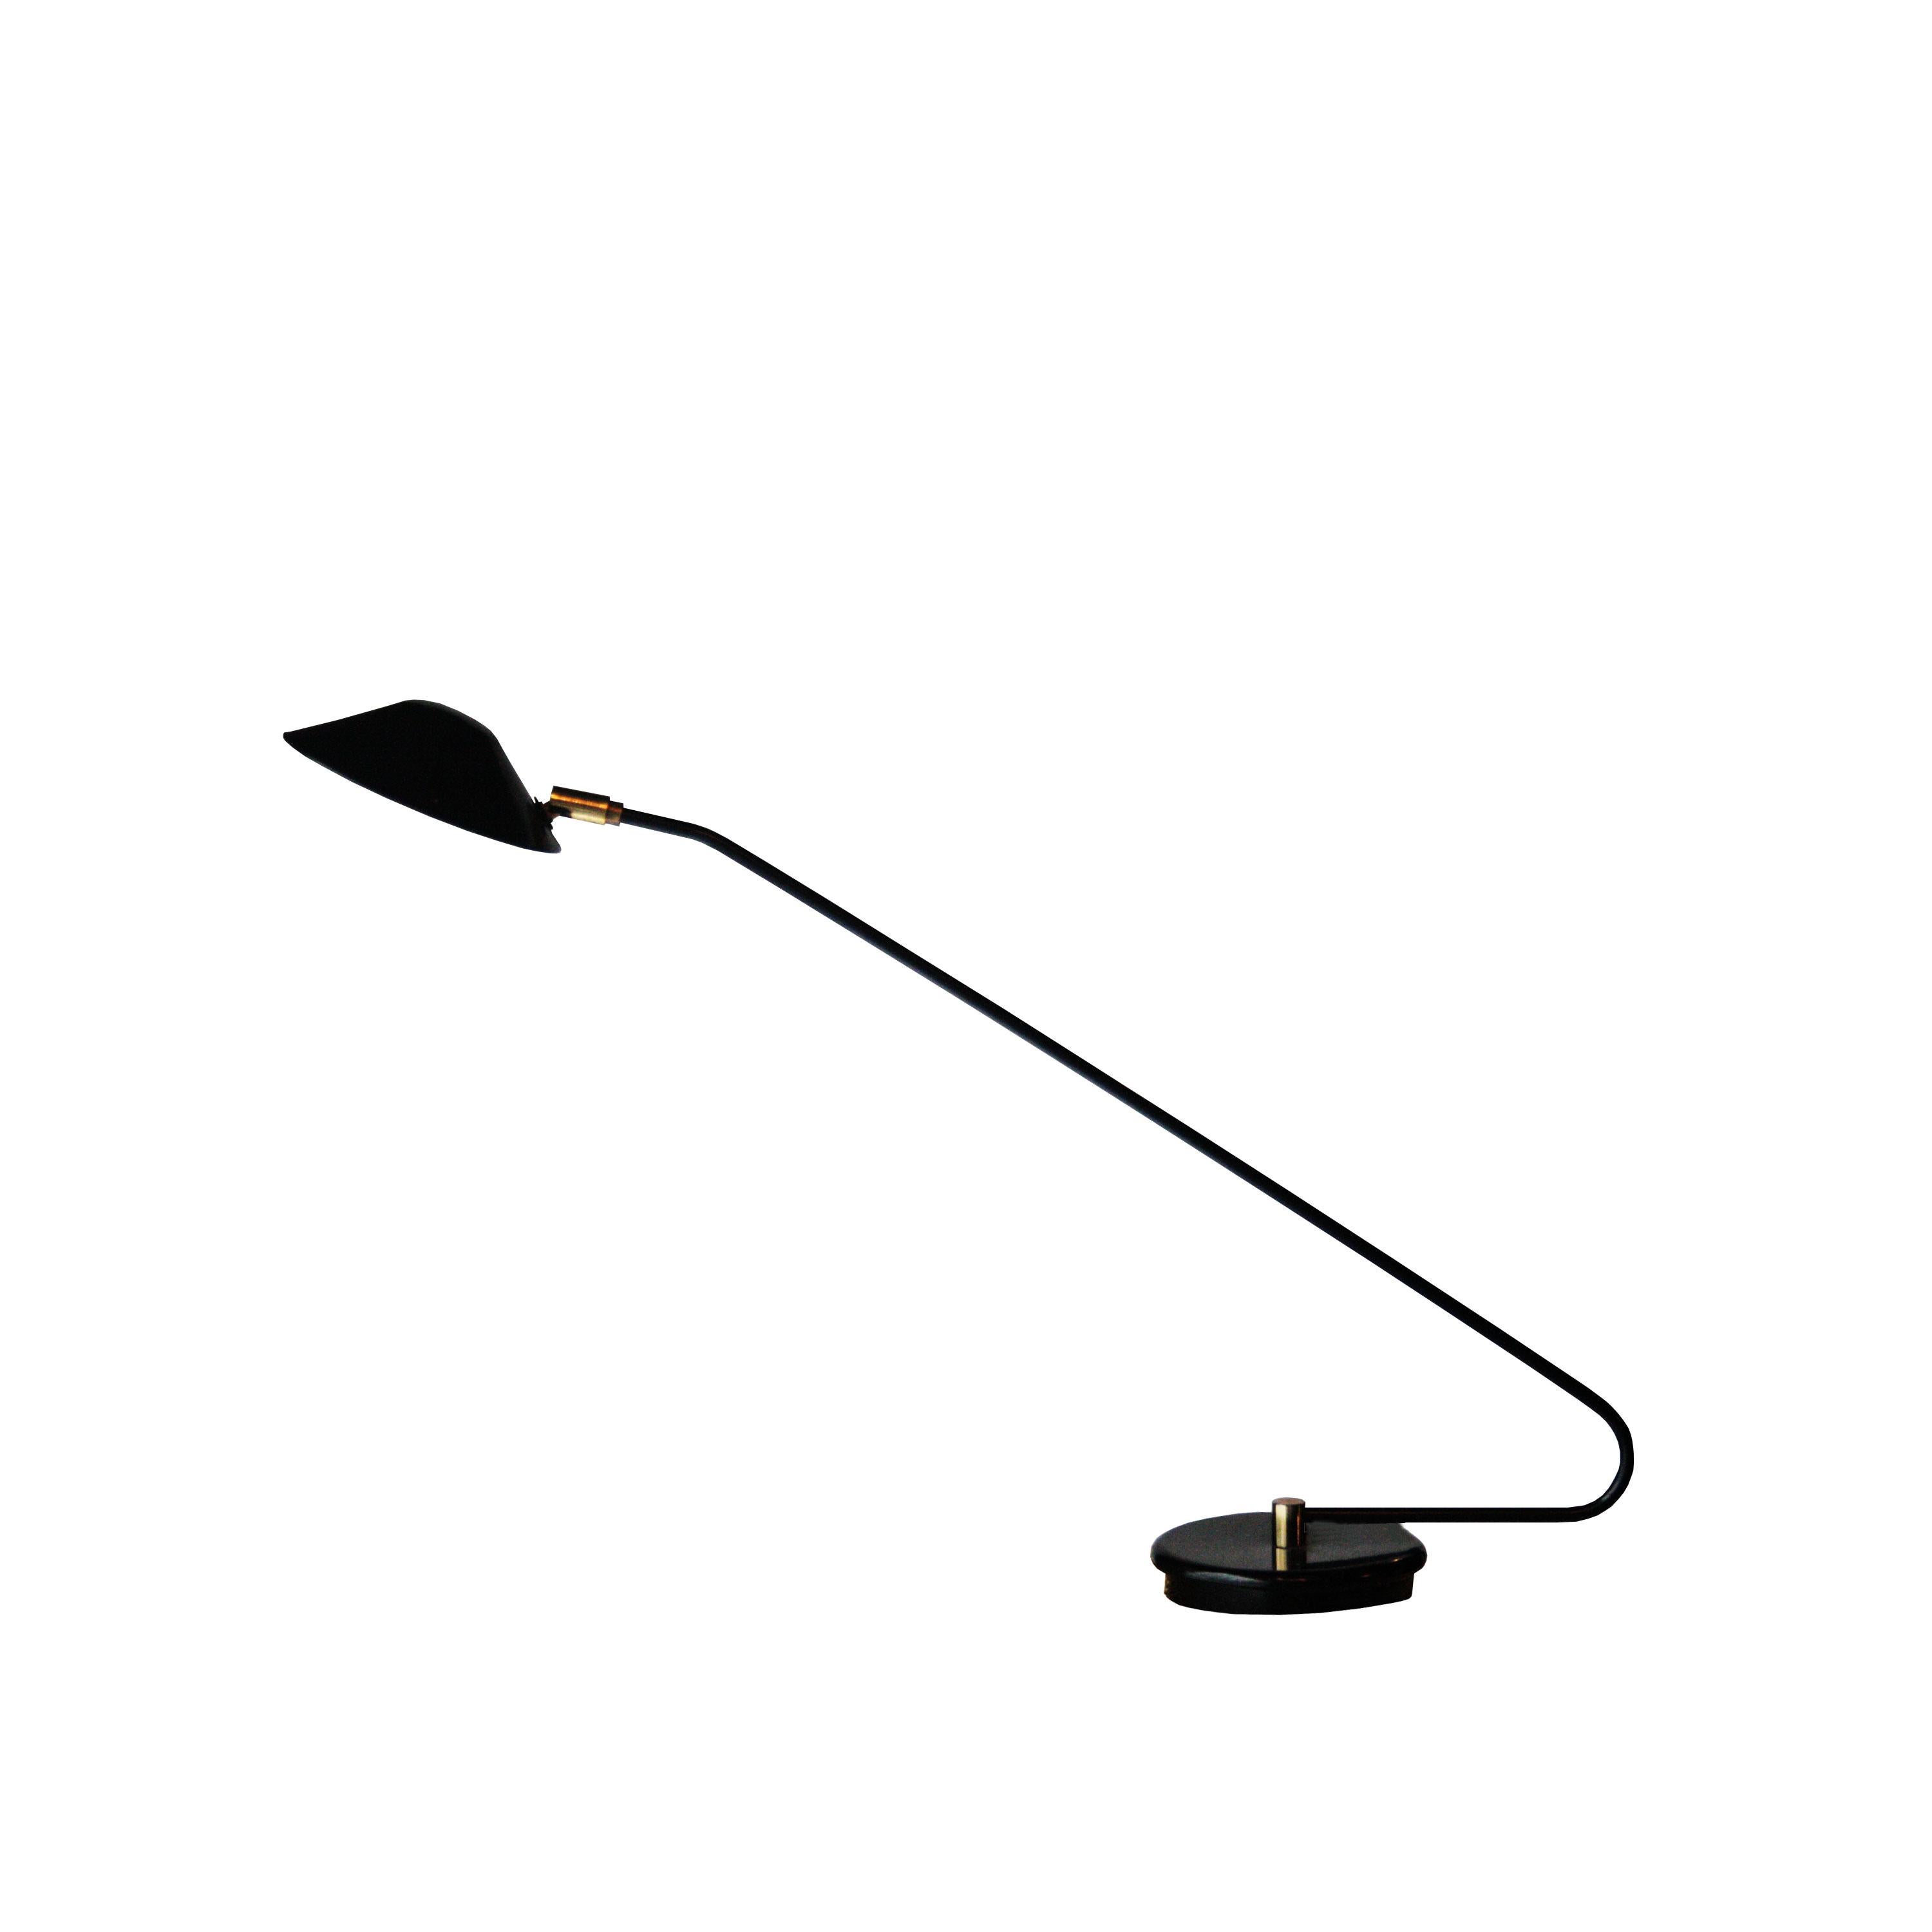 Italian desk lamp with structure and metal base lacquered in black with brass details.